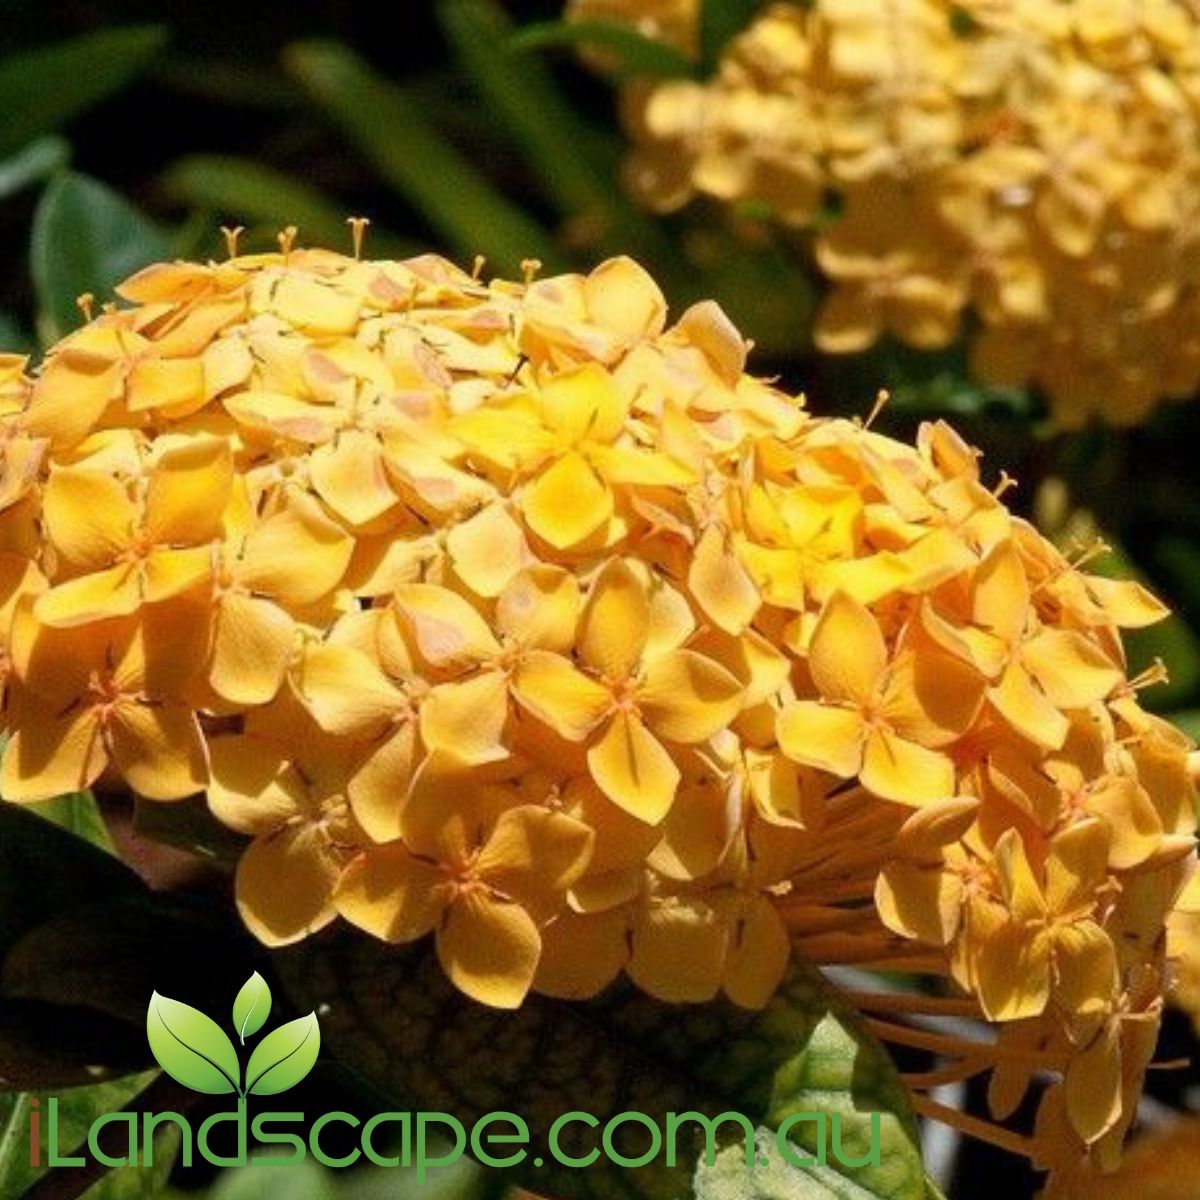 Ixora Compacta Gold produces masses of beautiful gold coloured flowers in heads. An evergreen shrub that grows to approx. 1.0m high  Feed seasonally and prune regular to keep a nice shape with lots of new growth 